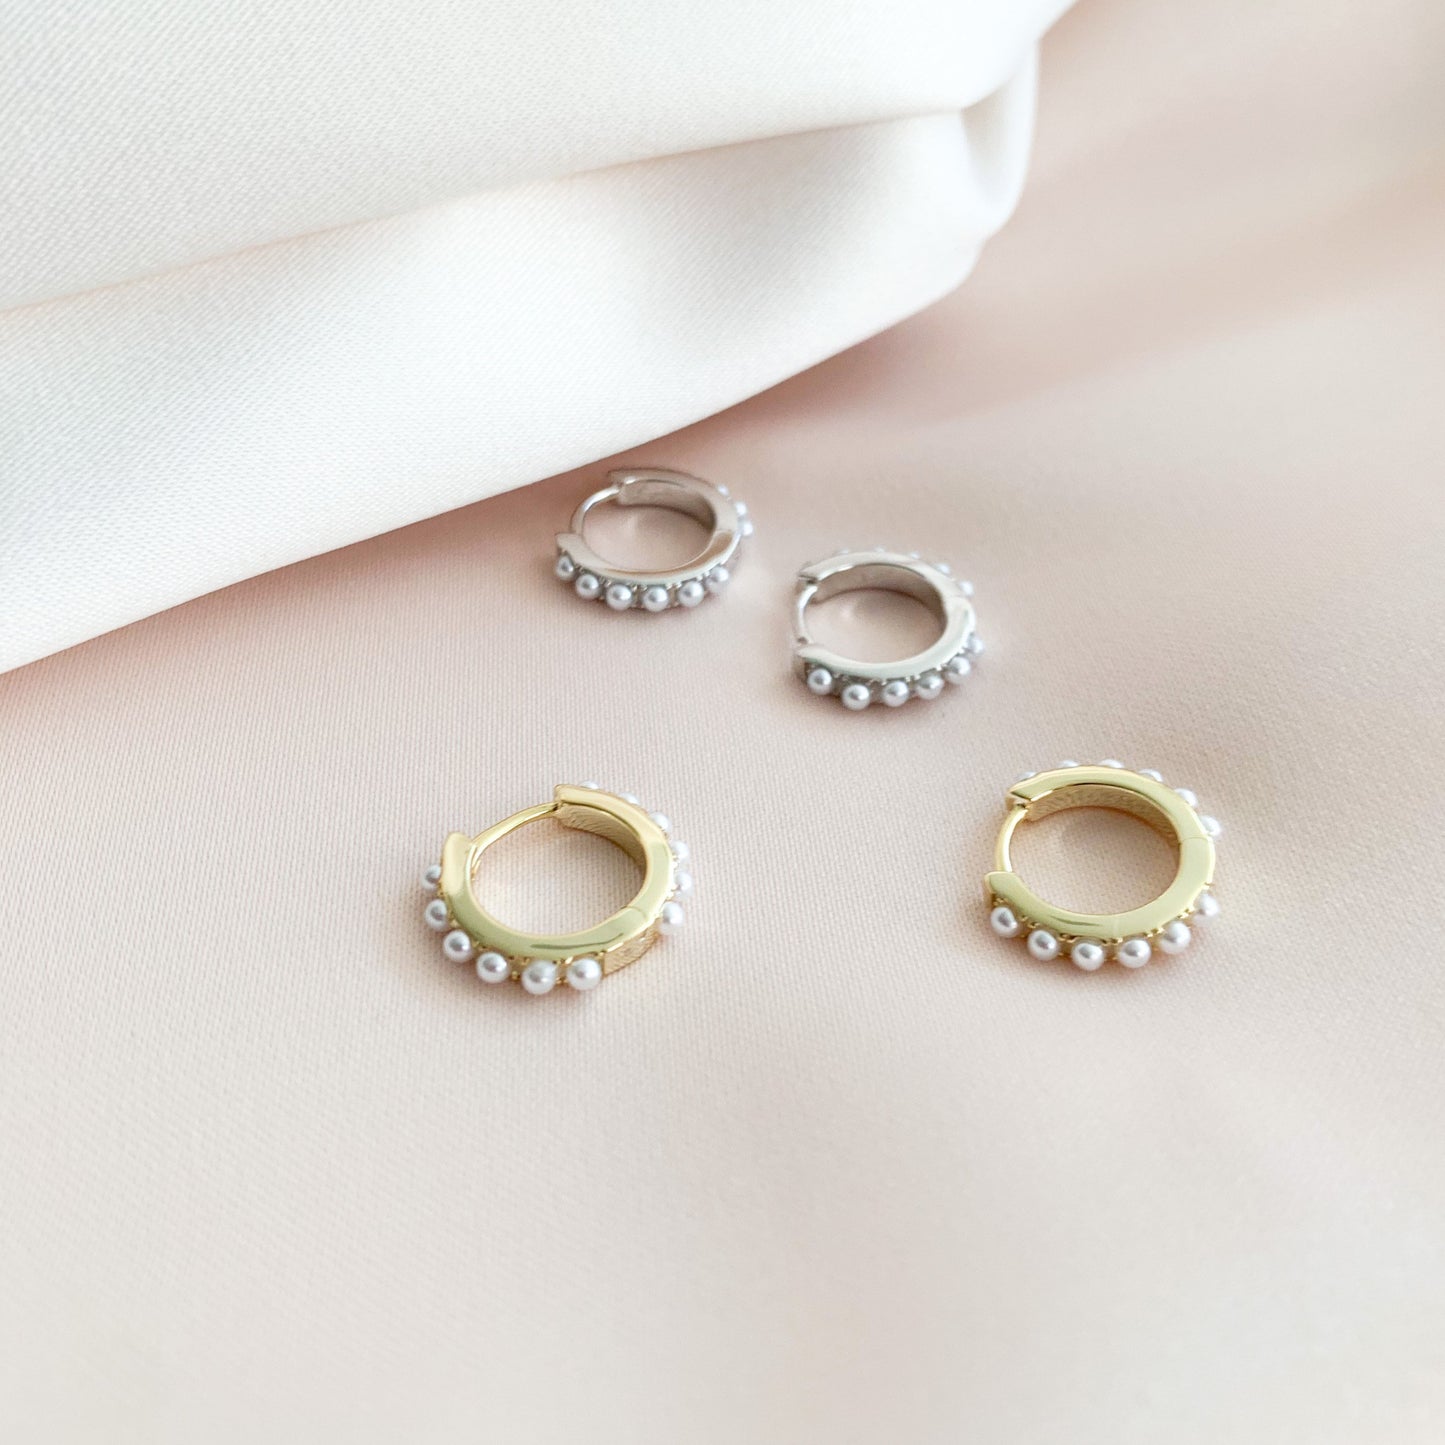 The gold and silver pearl huggie hoops earrings from Alexandra Marks Jewelry